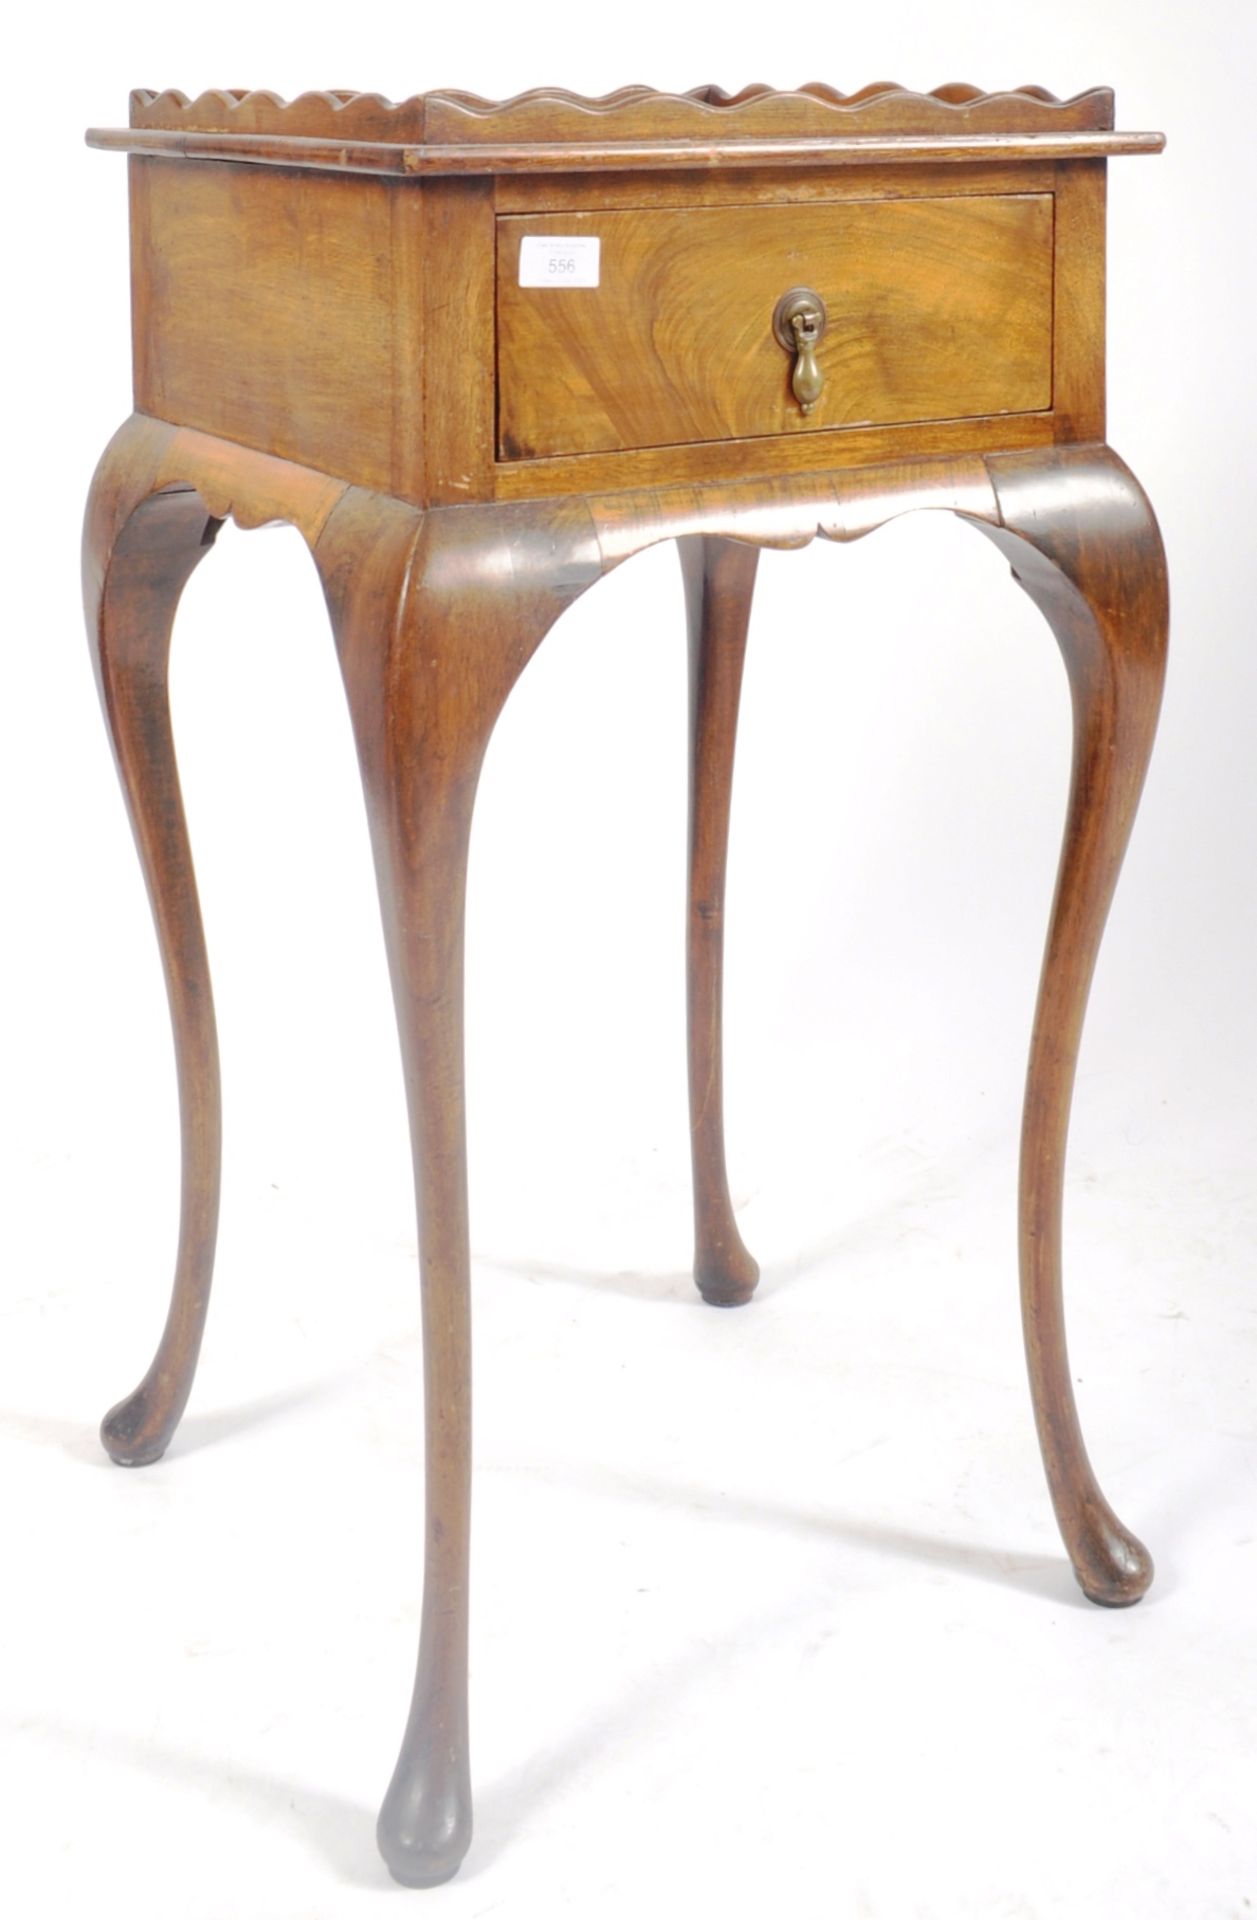 QUEEN ANNE REVIVAL CIRCA 1900 WALNUT BEDSIDE CABINET TABLE - Image 2 of 8